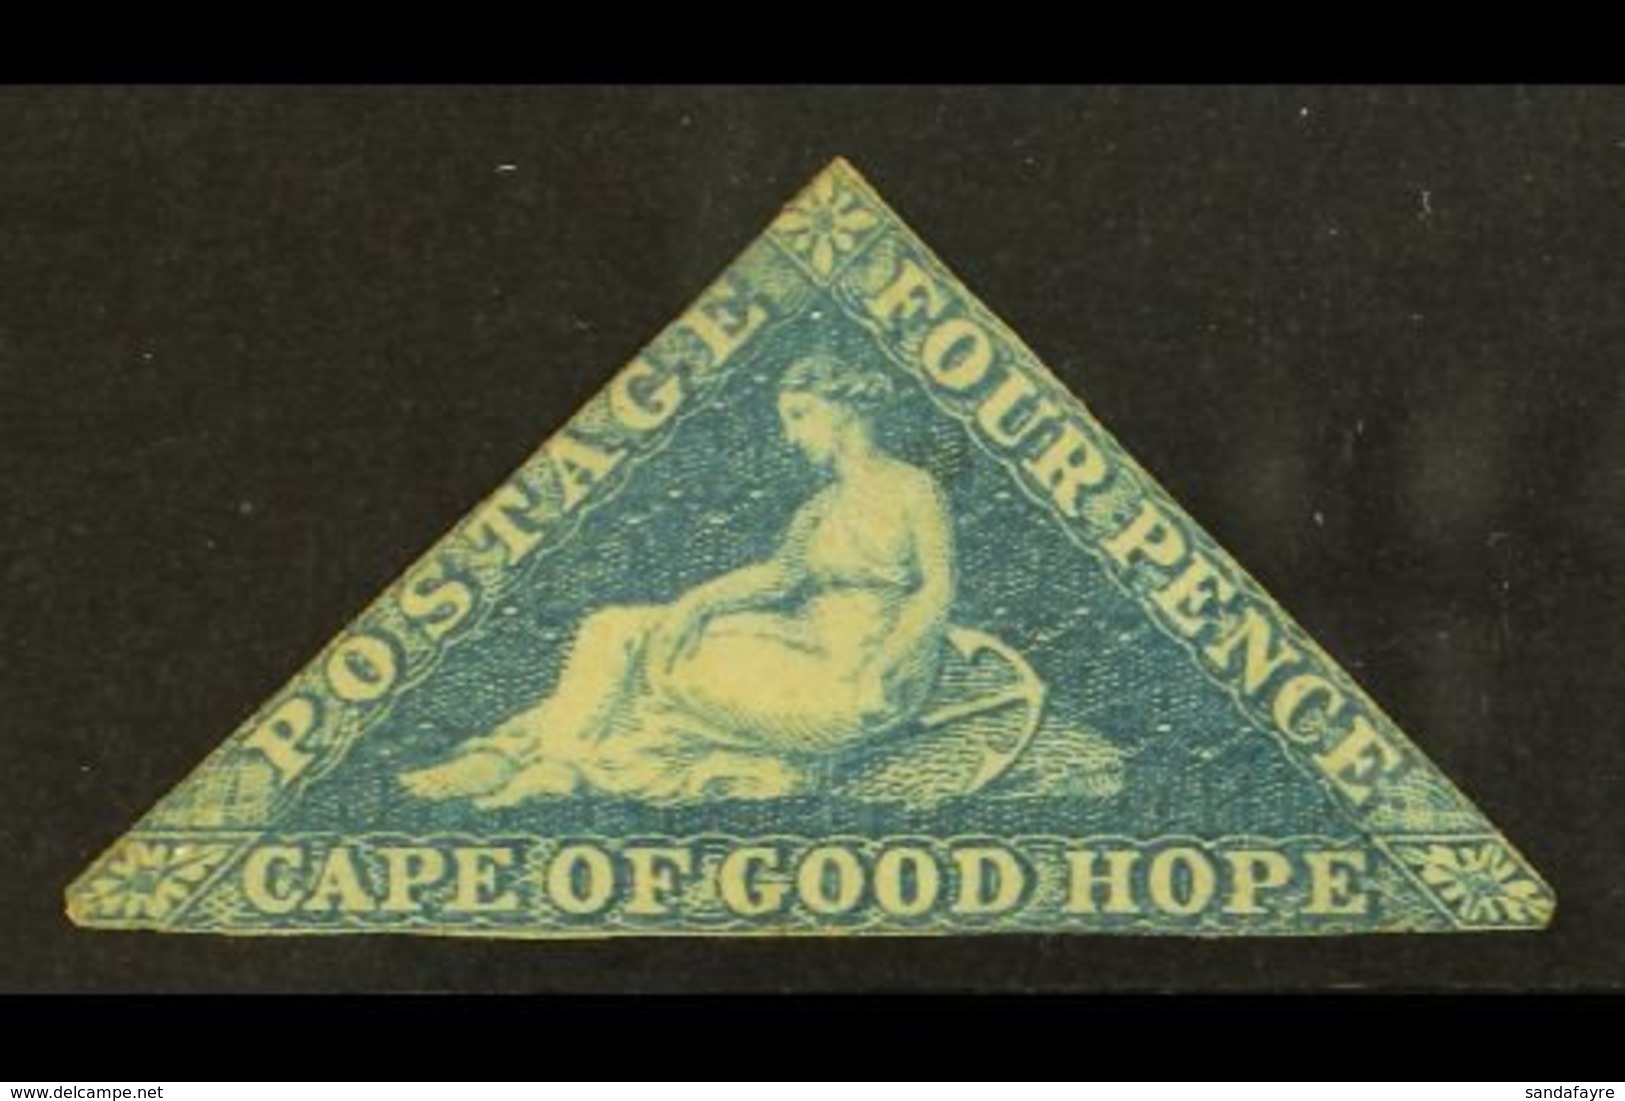 CAPE OF GOOD HOPE 1855-63 4d Blue, SG 6a, Unused With Small/touching Margins, Cat £1000. For More Images, Please Visit H - Unclassified